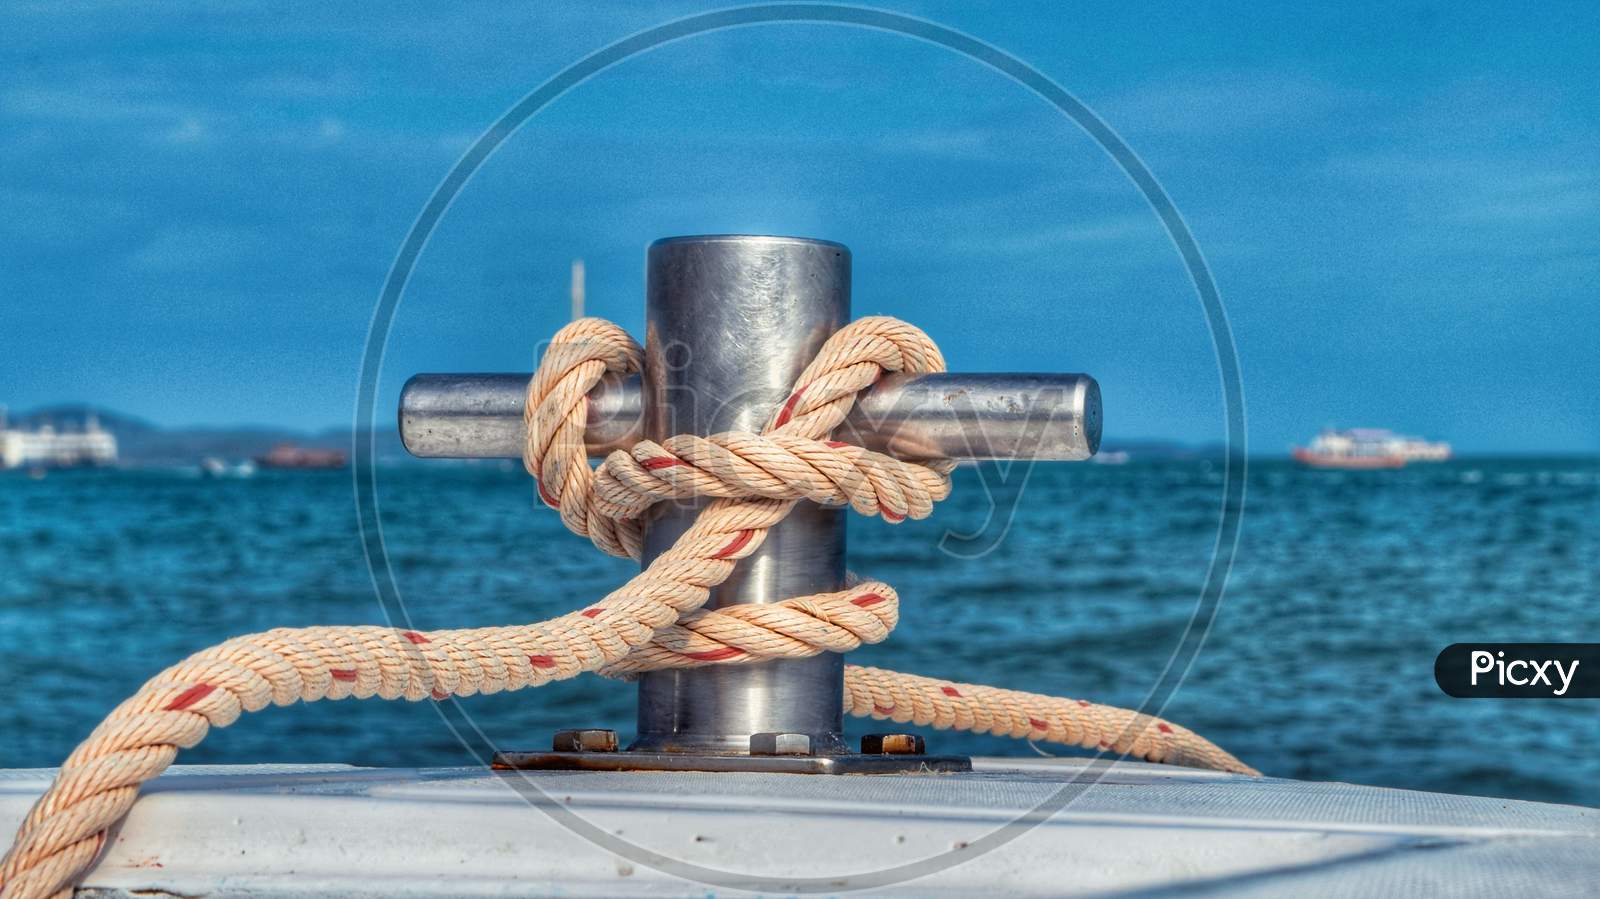 Image of Boat, rope-QF567460-Picxy